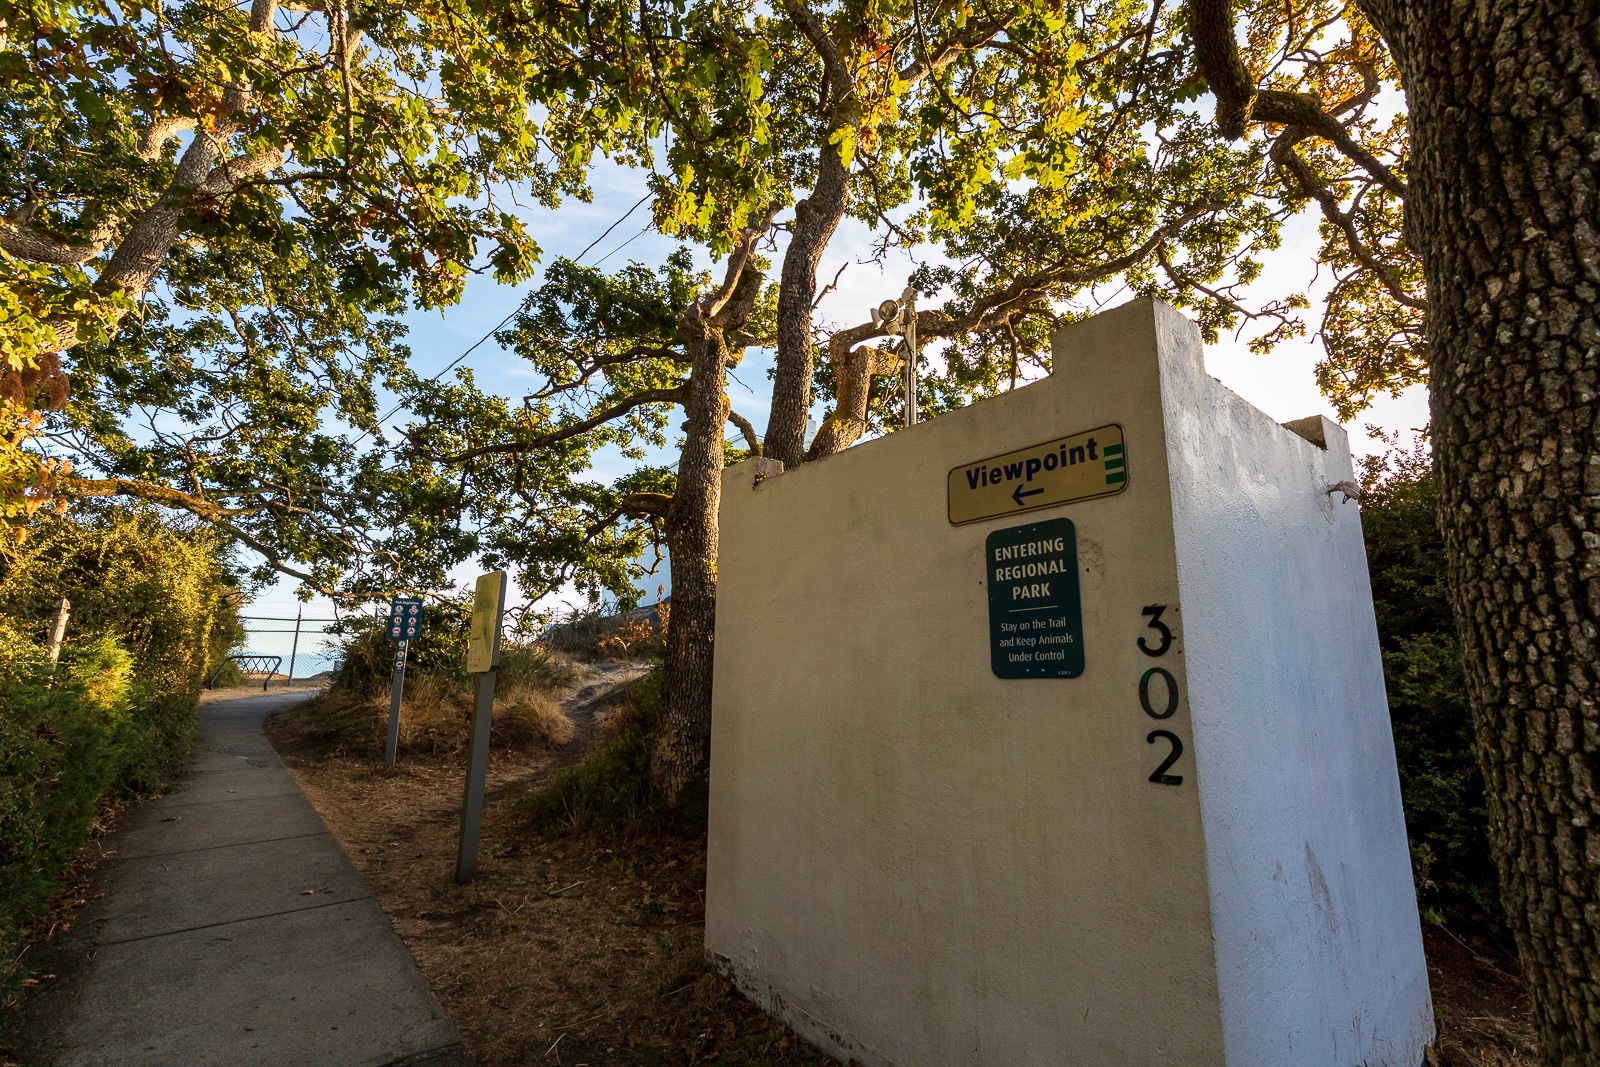 The entrance to Gonzales Hill Regional Park and the Gonzales Observatory